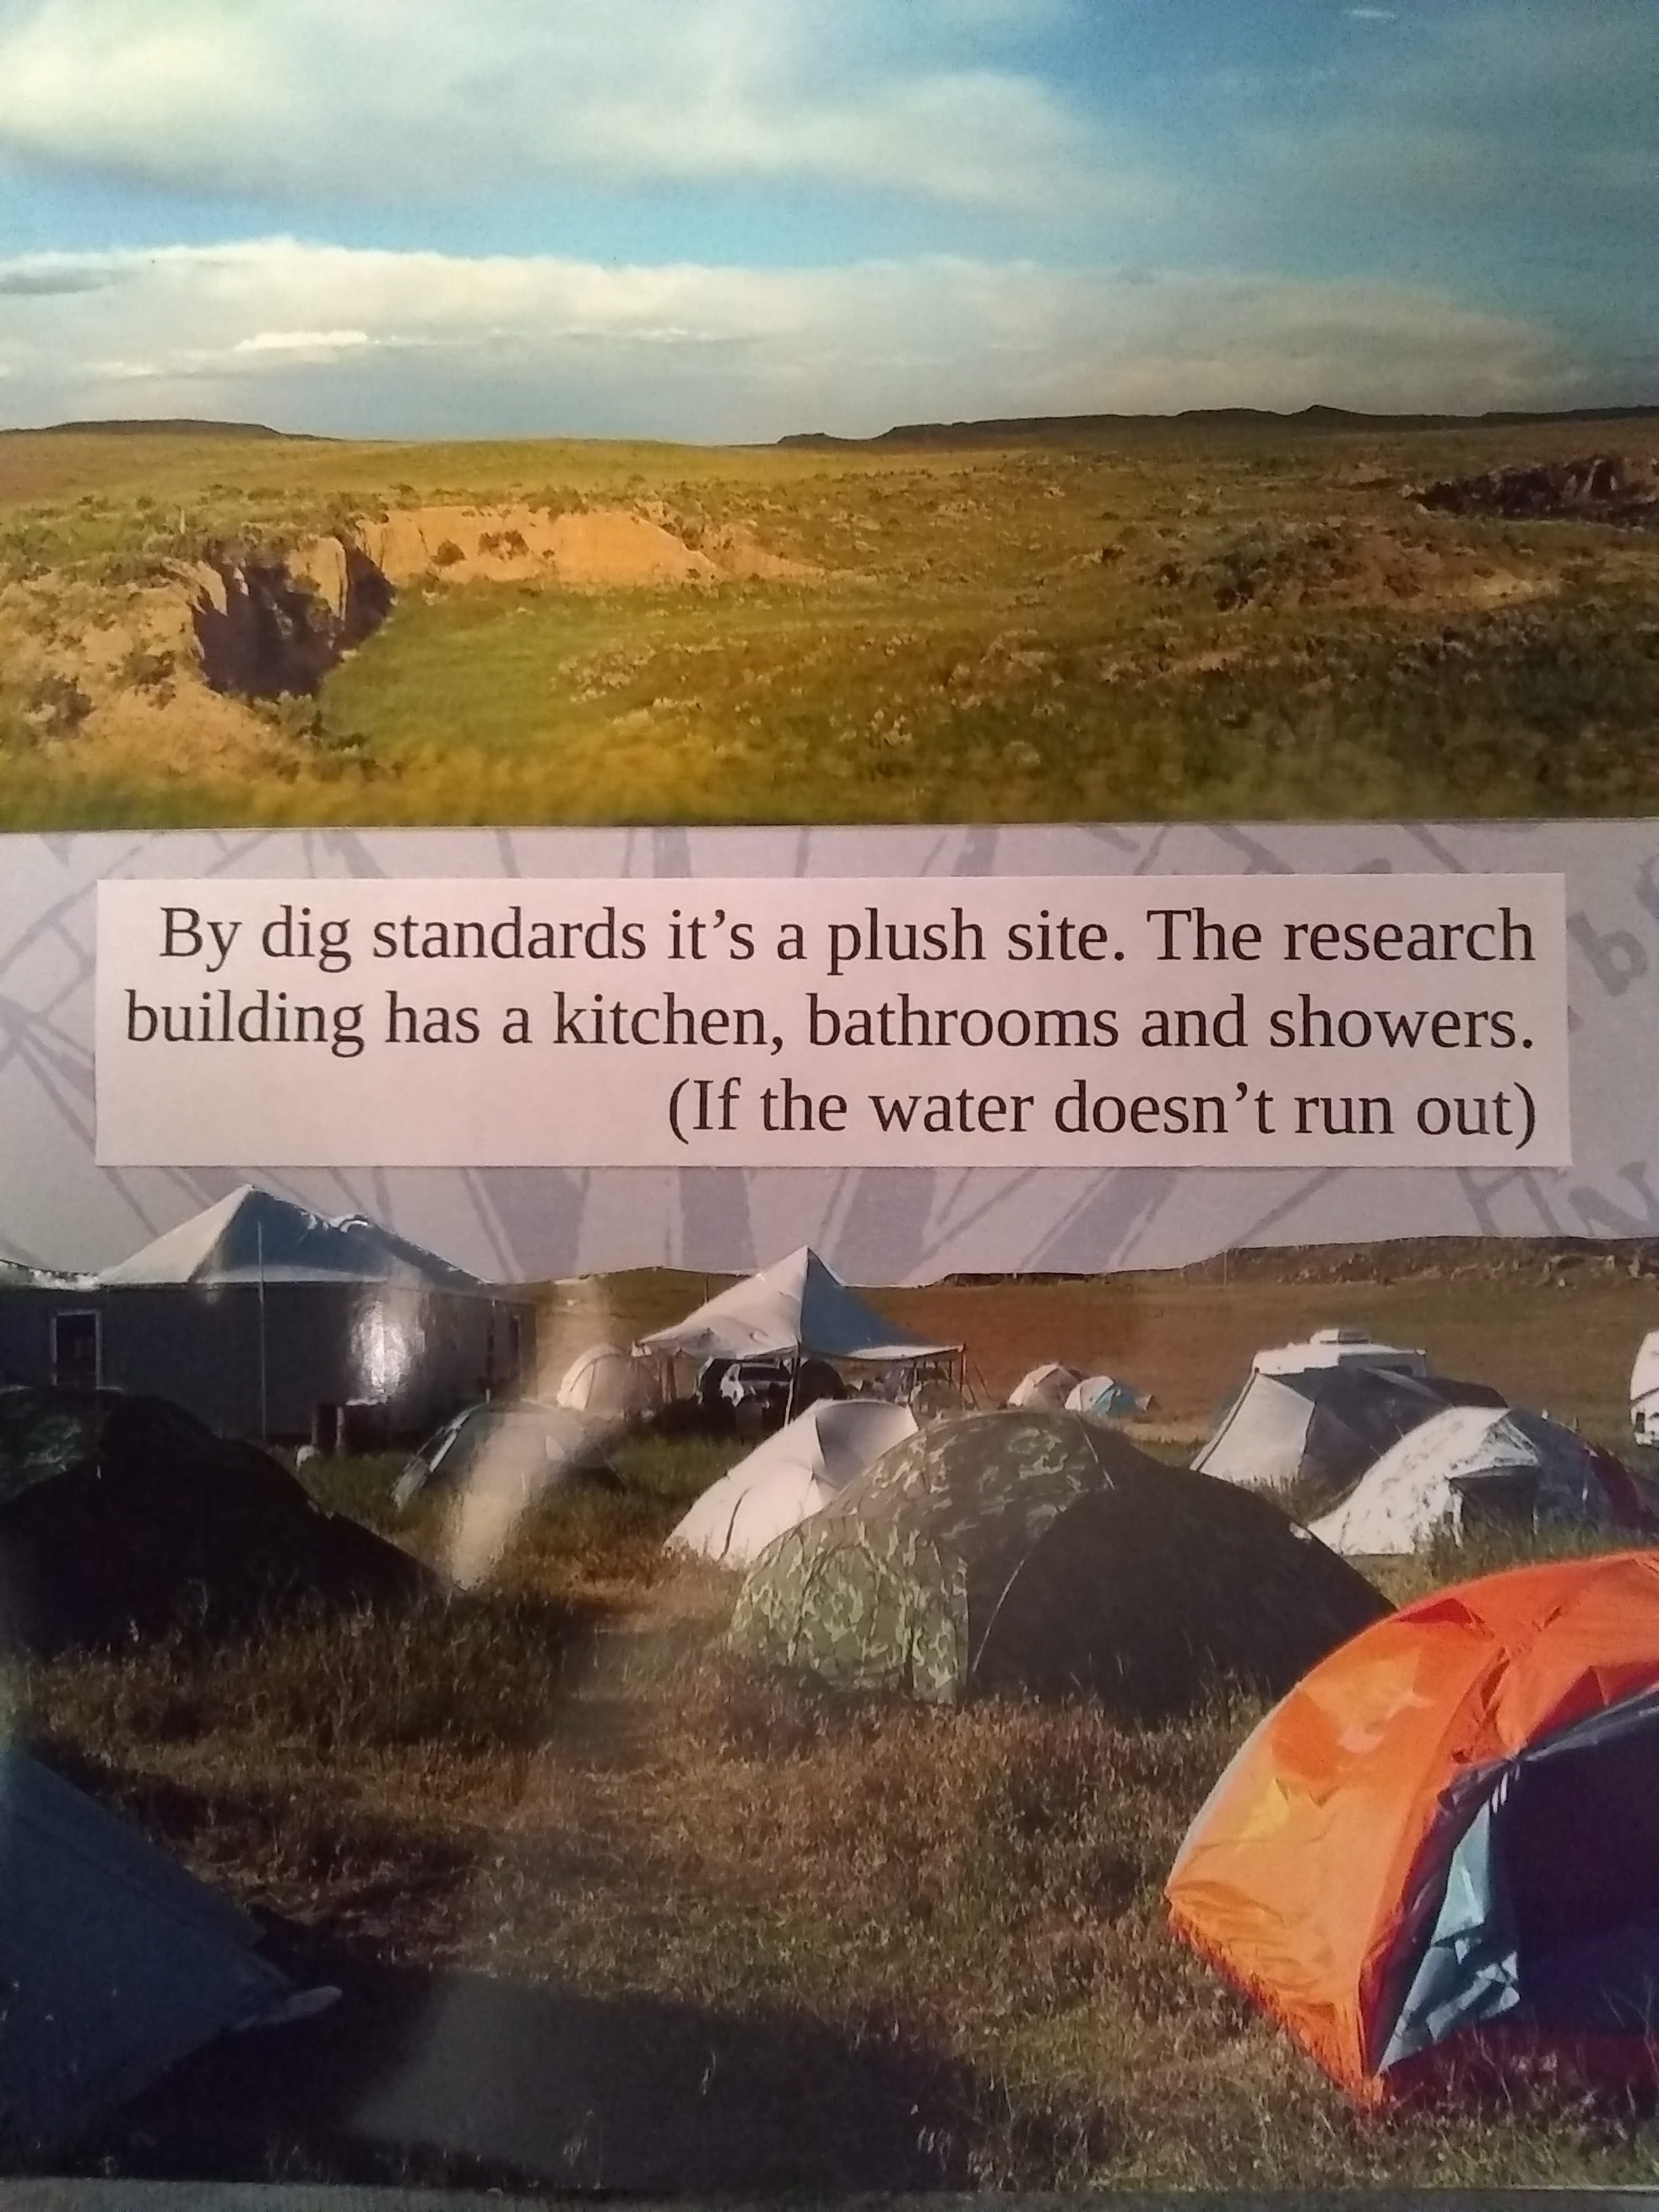 By dig standards it's a plush site. The research building has a kitchen, bathroom and showers. (If the water doesn't run out)